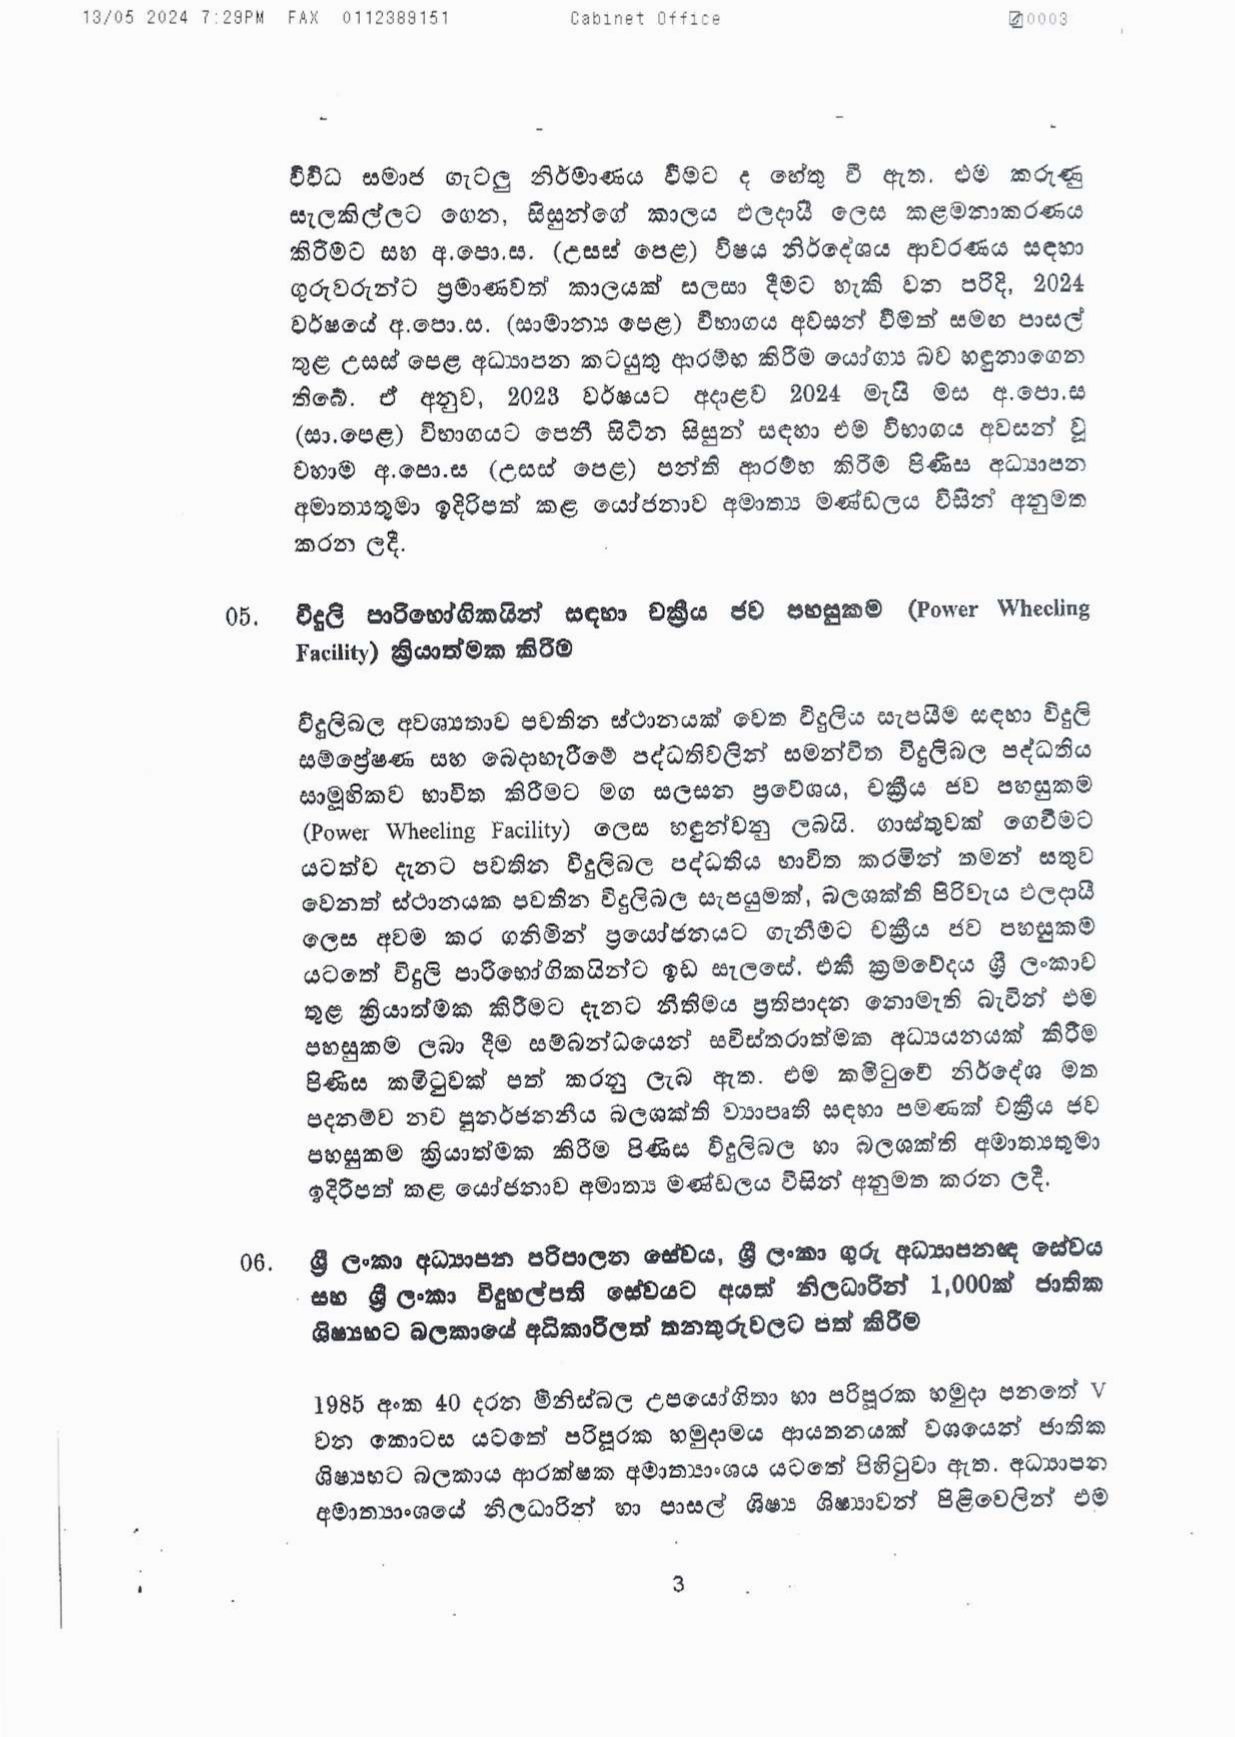 Cabinet Decisions on 13.05.2024 compressed page 00031